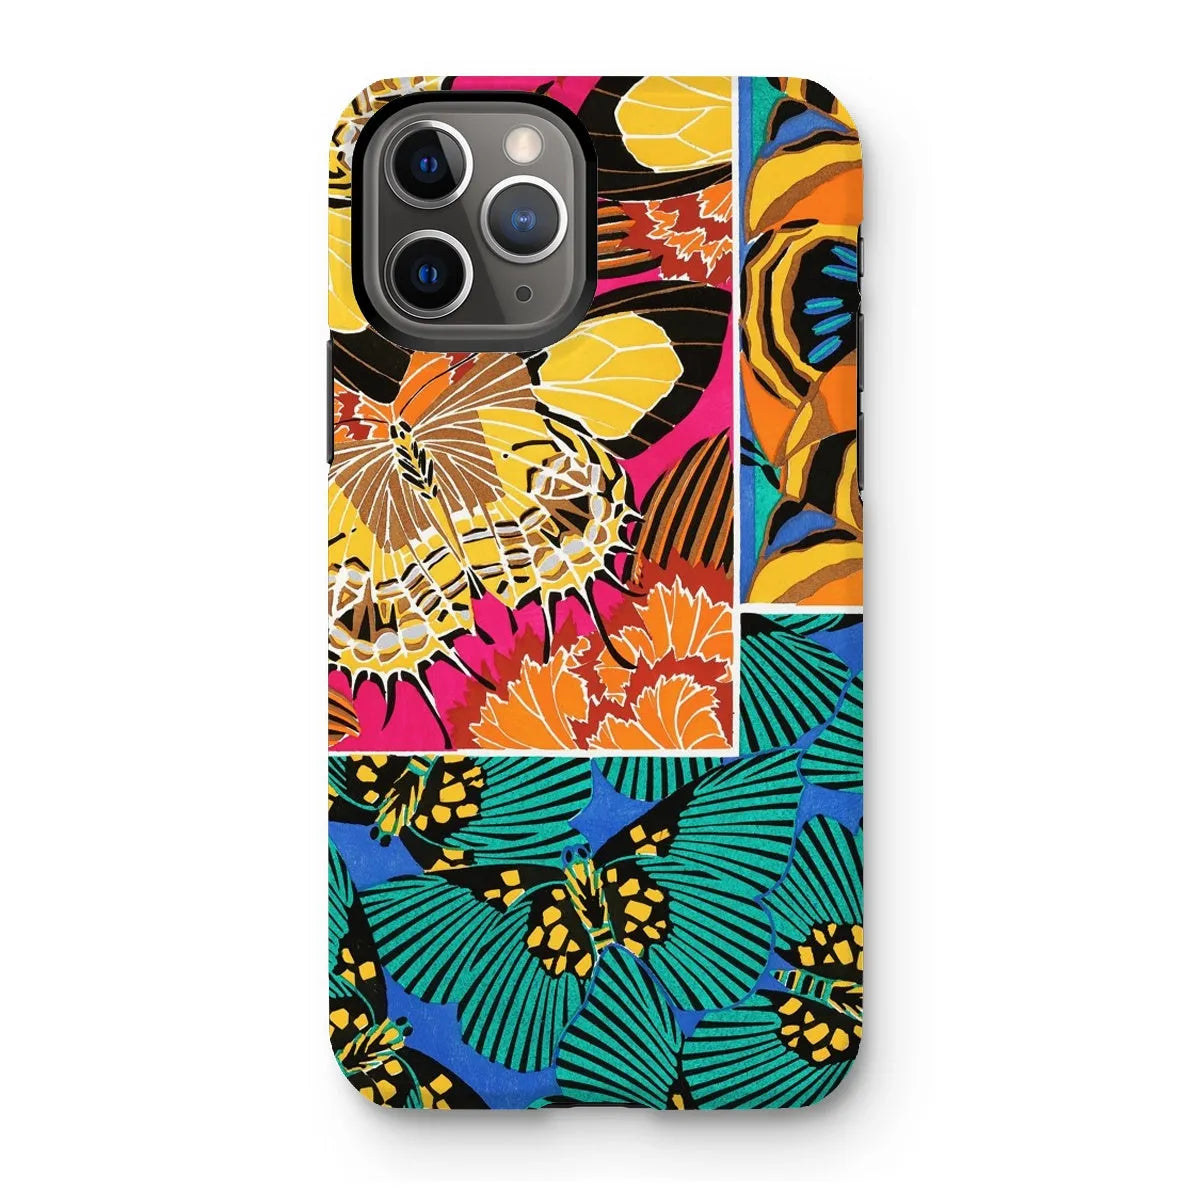 Rainbow Butterfly Aesthetic Art Phone Case - E.a. Seguy - Iphone 11 Pro / Matte - Mobile Phone Cases - Aesthetic Art